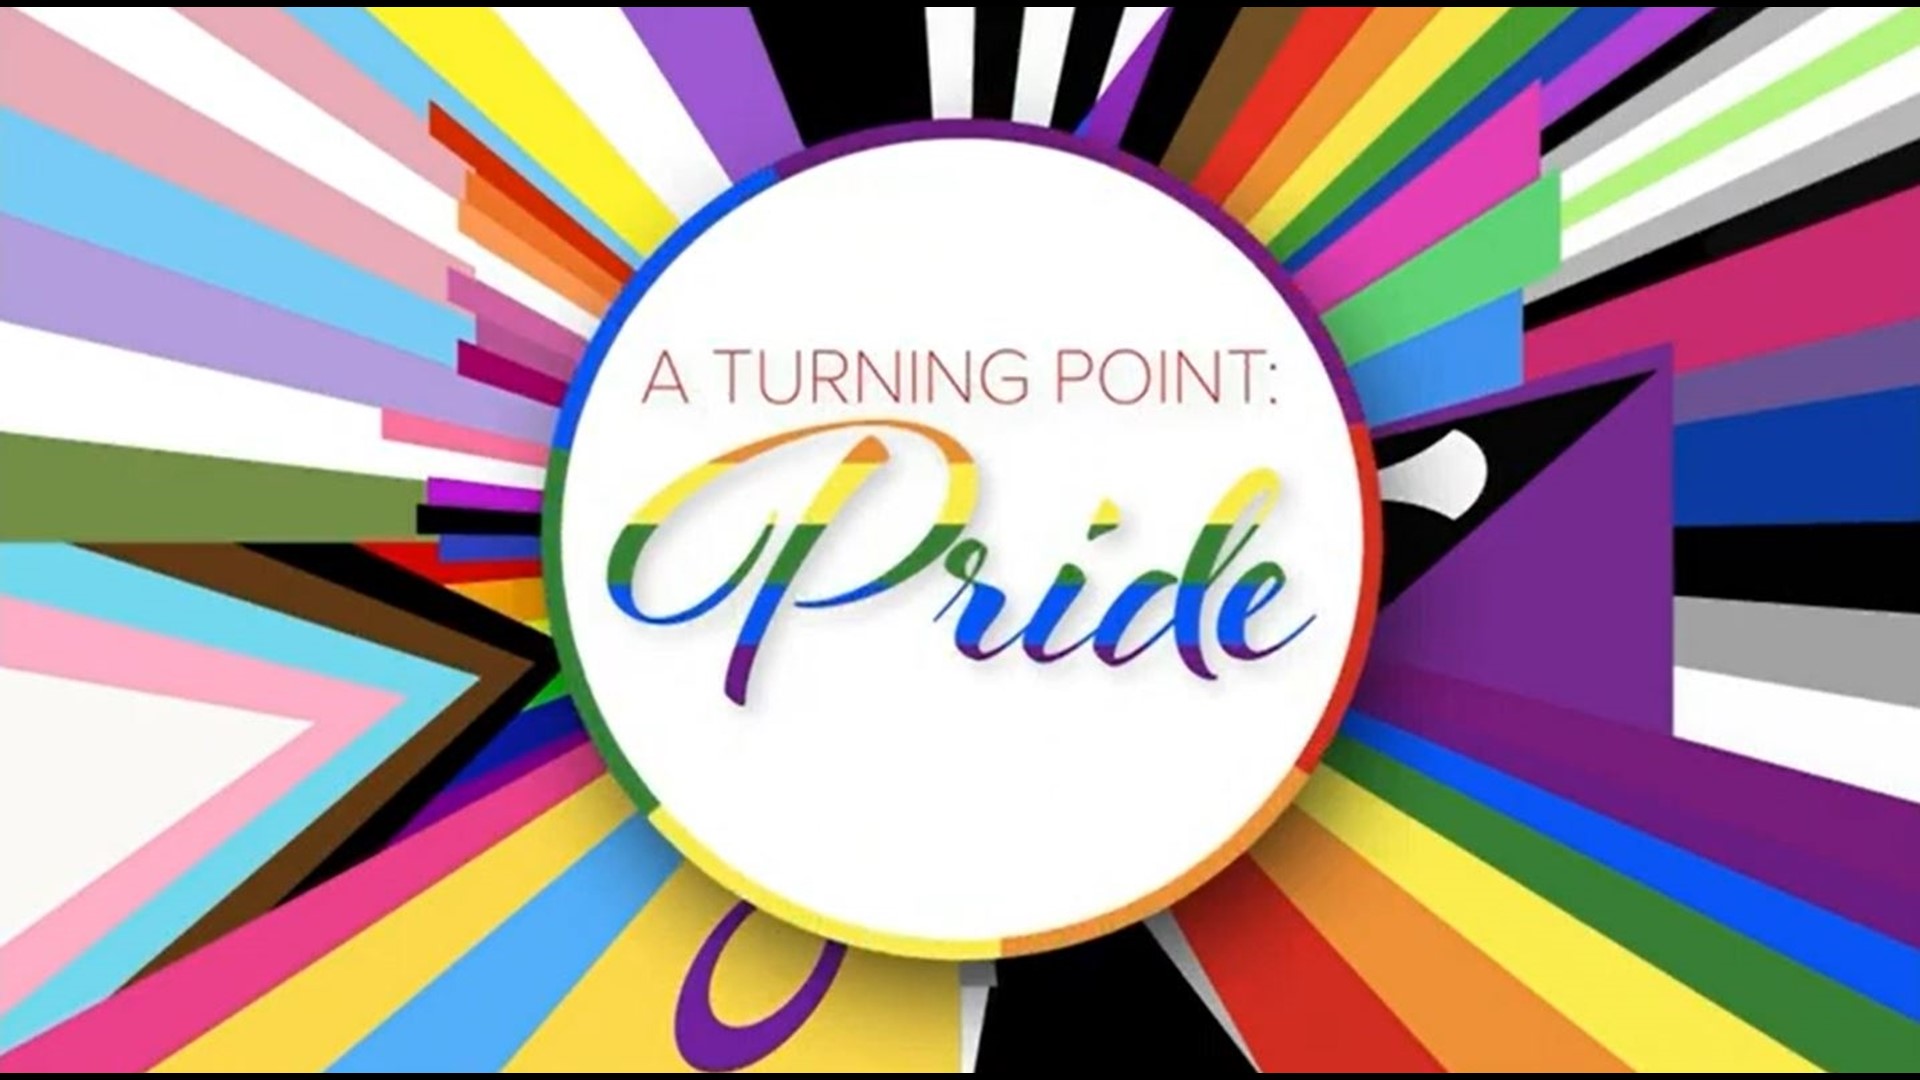 On the latest edition of A Turning Point, we celebrate the pride and strides while reflecting on the ongoing challenges facing Northeast Ohio's LGBTQ+ community.